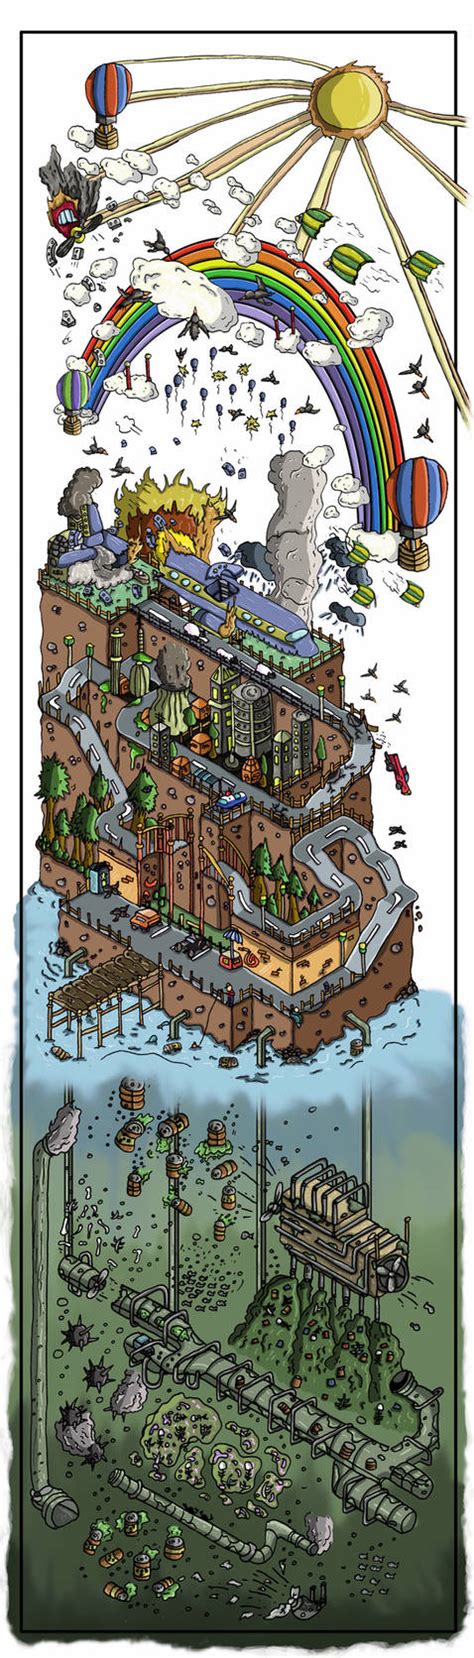 Giant Isometric Level Design By Towers89 On Deviantart